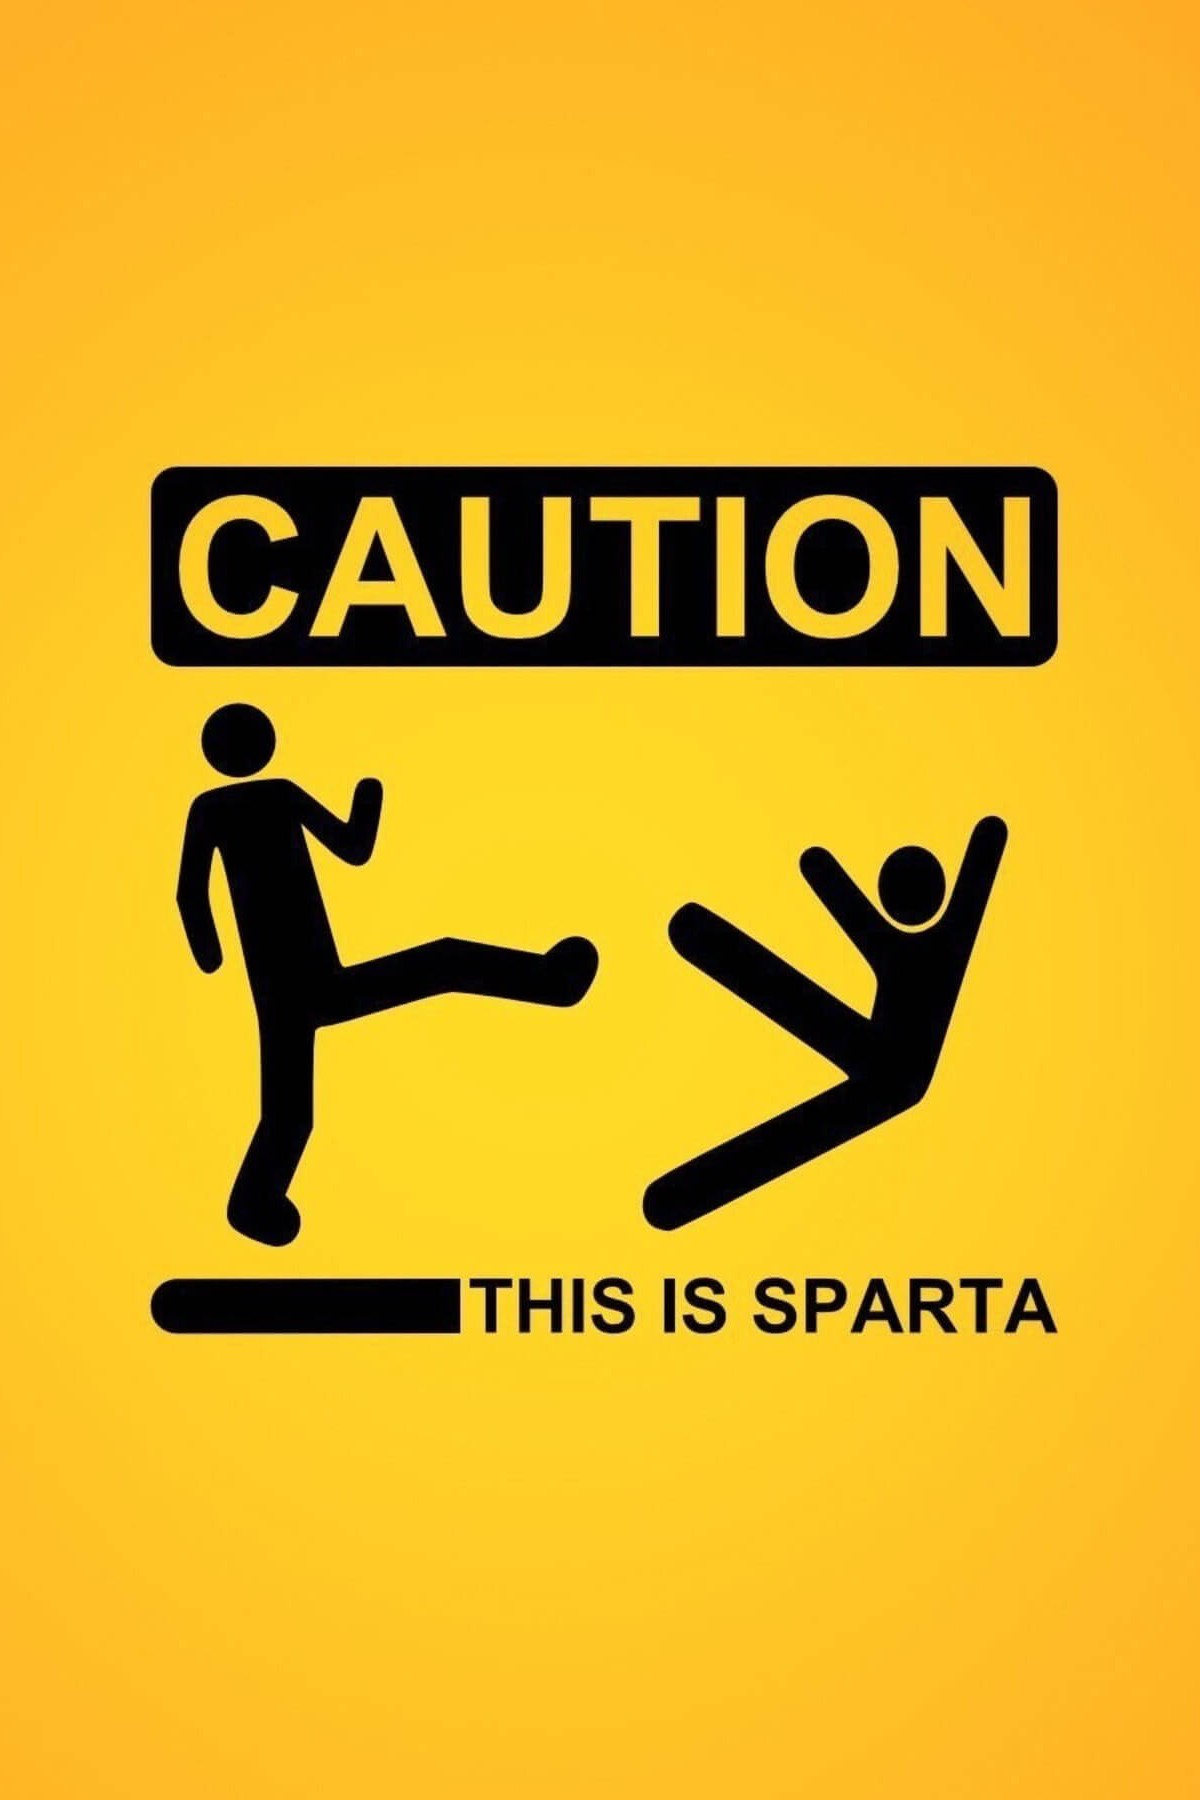 Caution This Is Sparta Wallpaper For Amazon Kindle Fire HDx